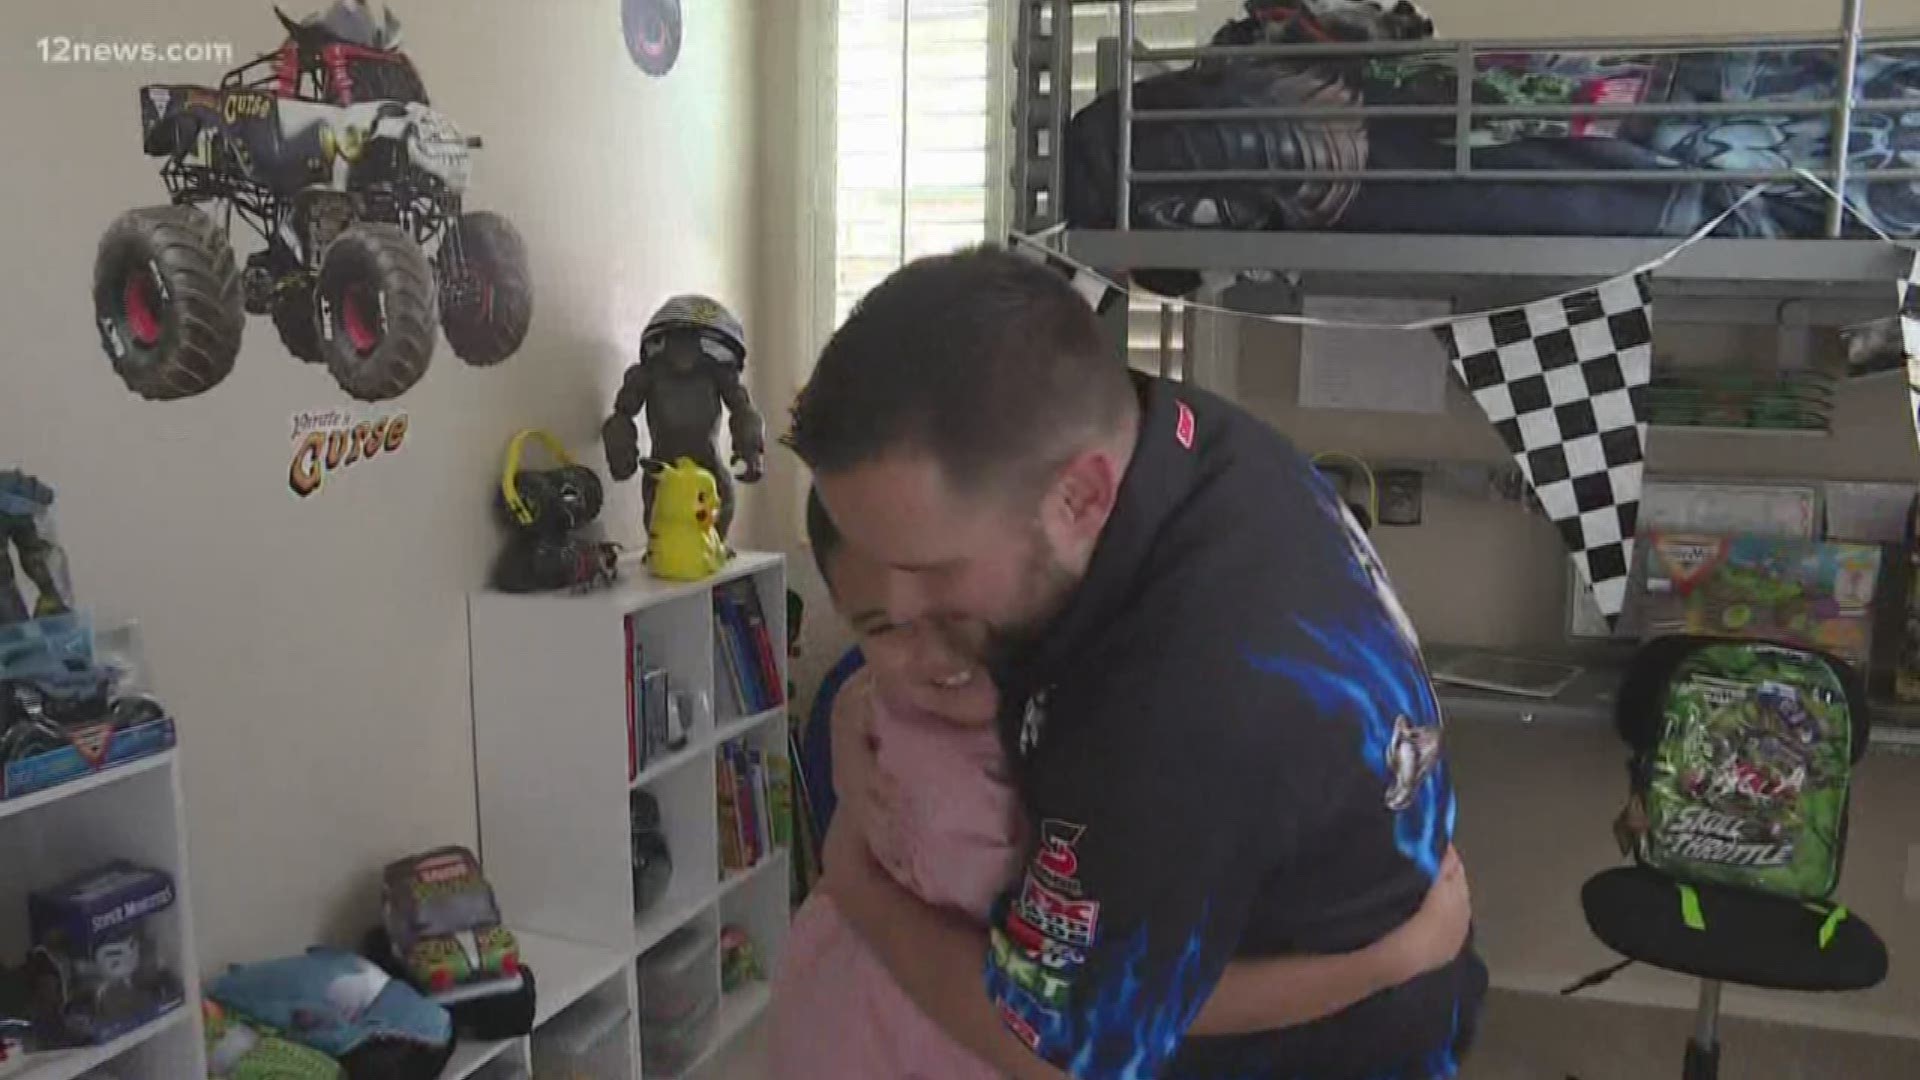 Deployment is hard for children who miss out on valuable time with their parents. One lucky boy got a surprise that he'll be able to share with his dad.